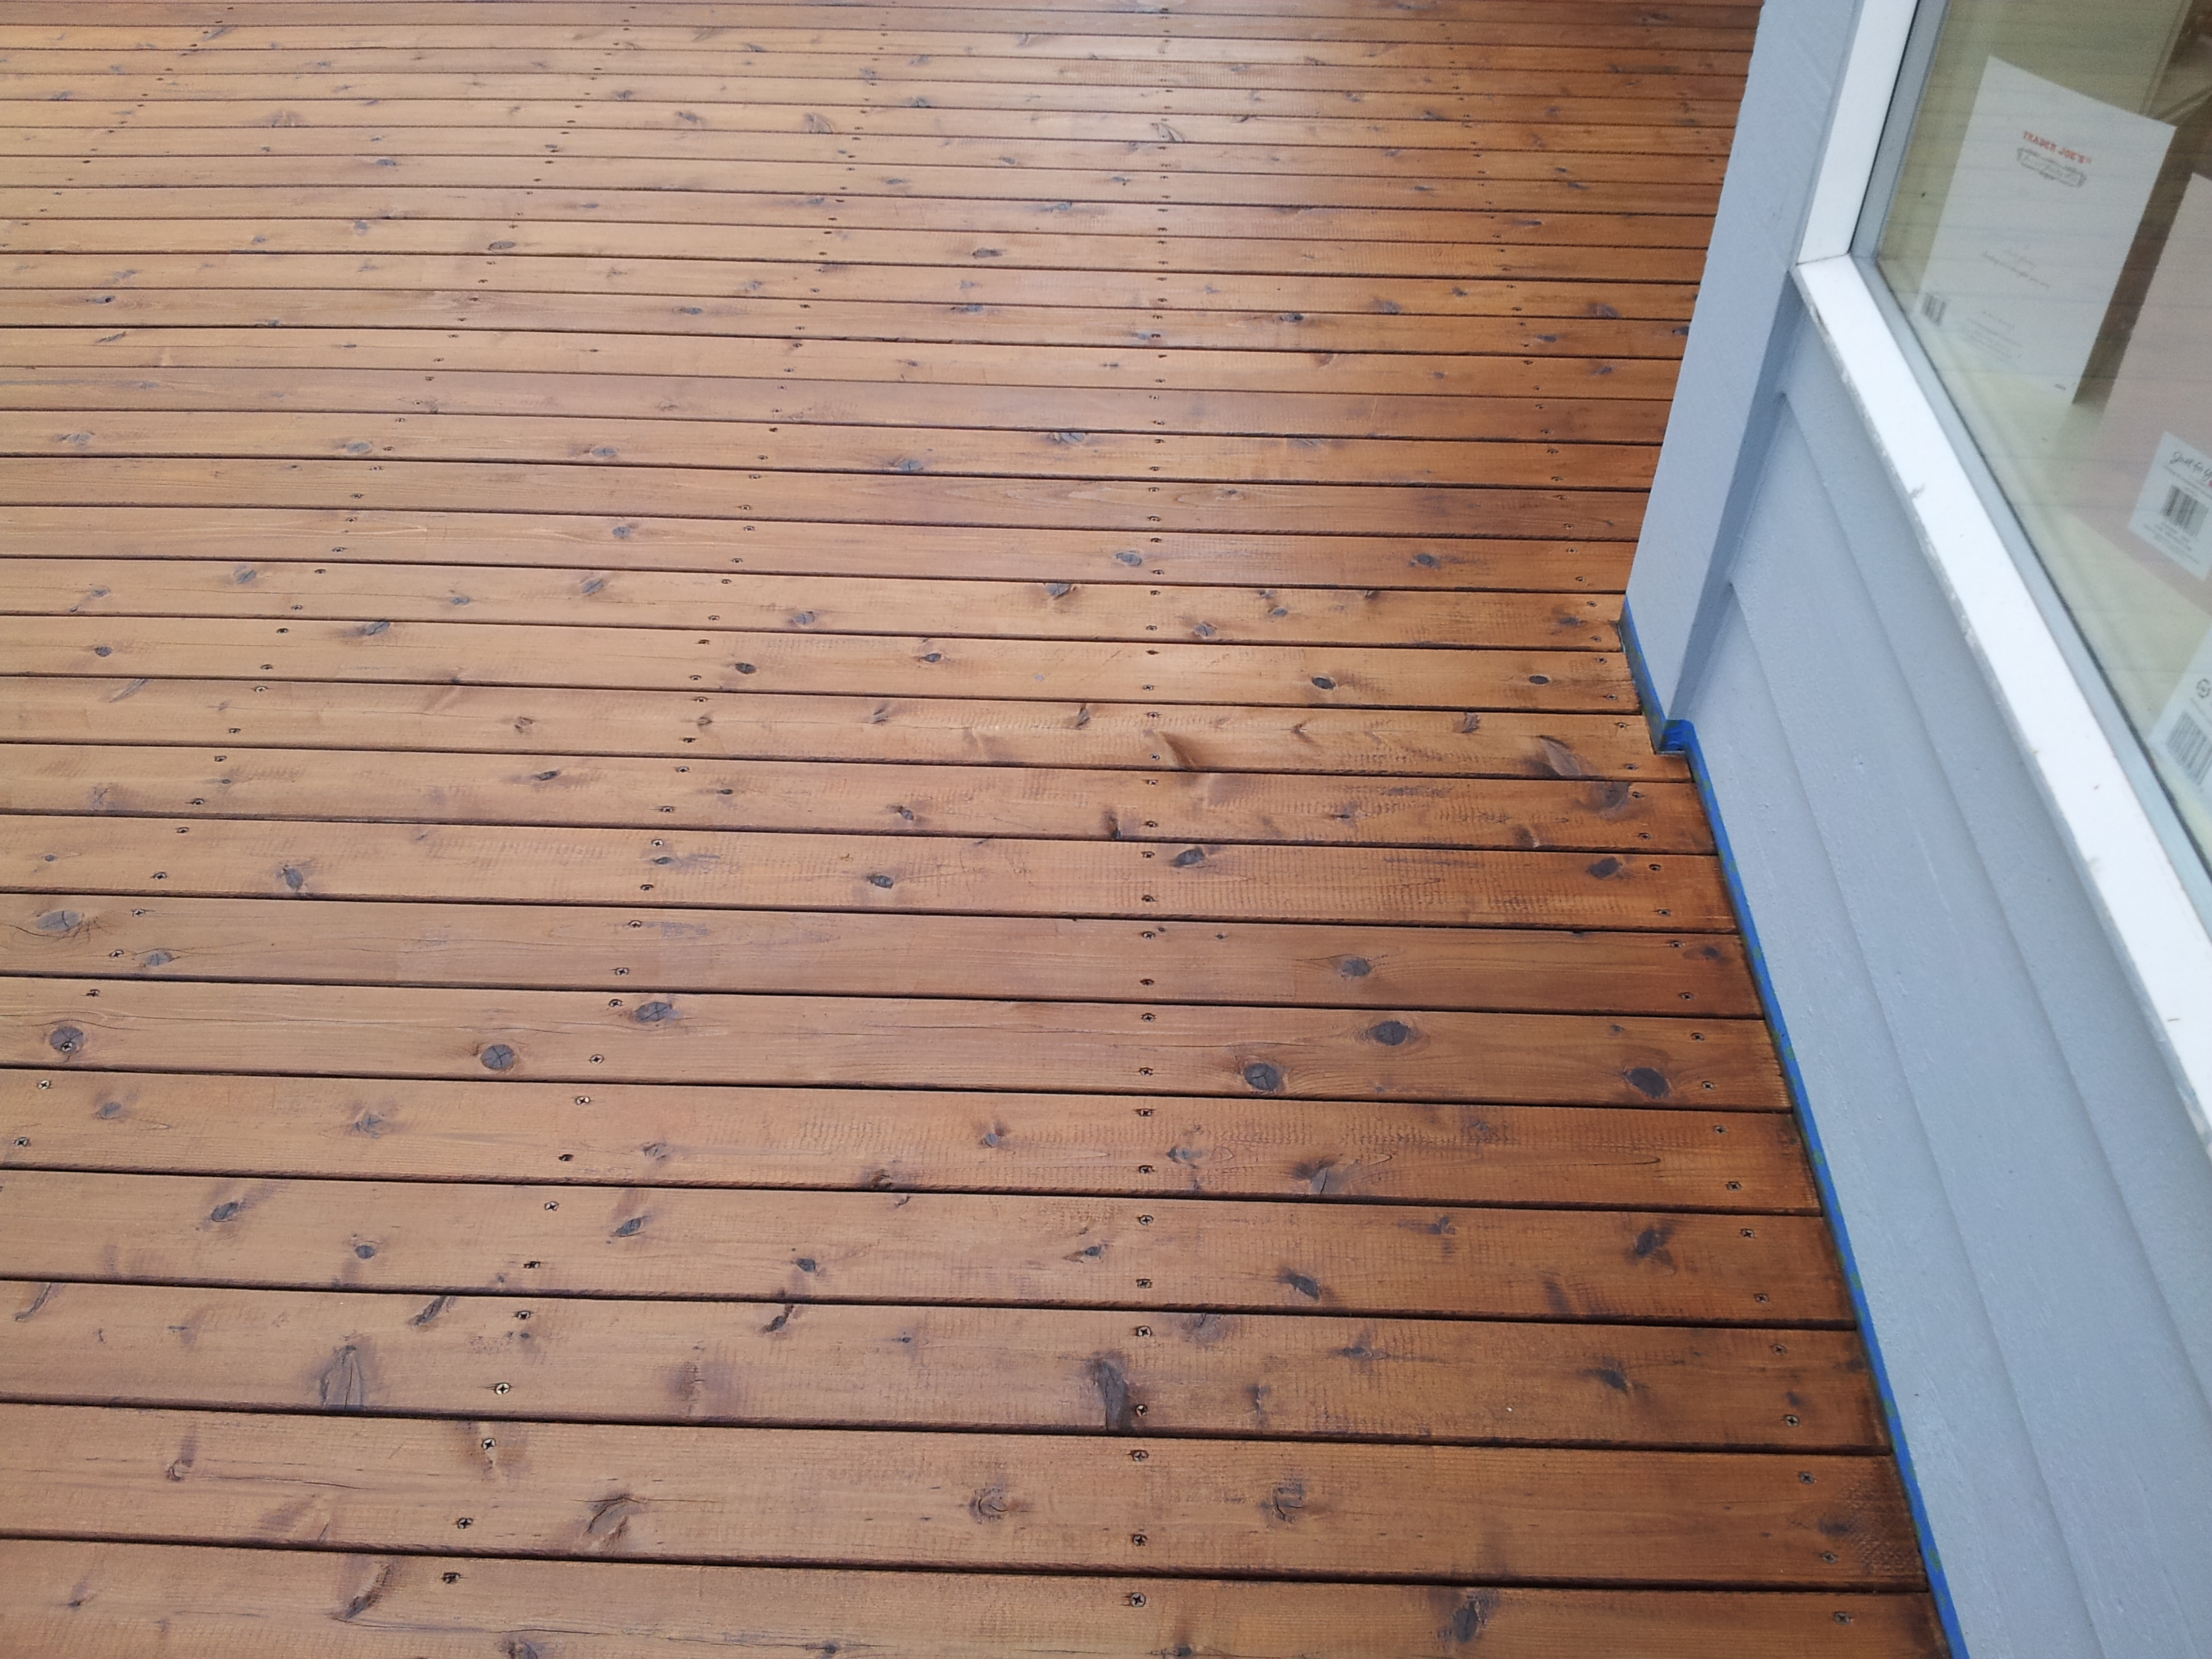 Oil Based Deck Stains 2019 Best Deck Stain Reviews Ratings with size 3264 X 2448